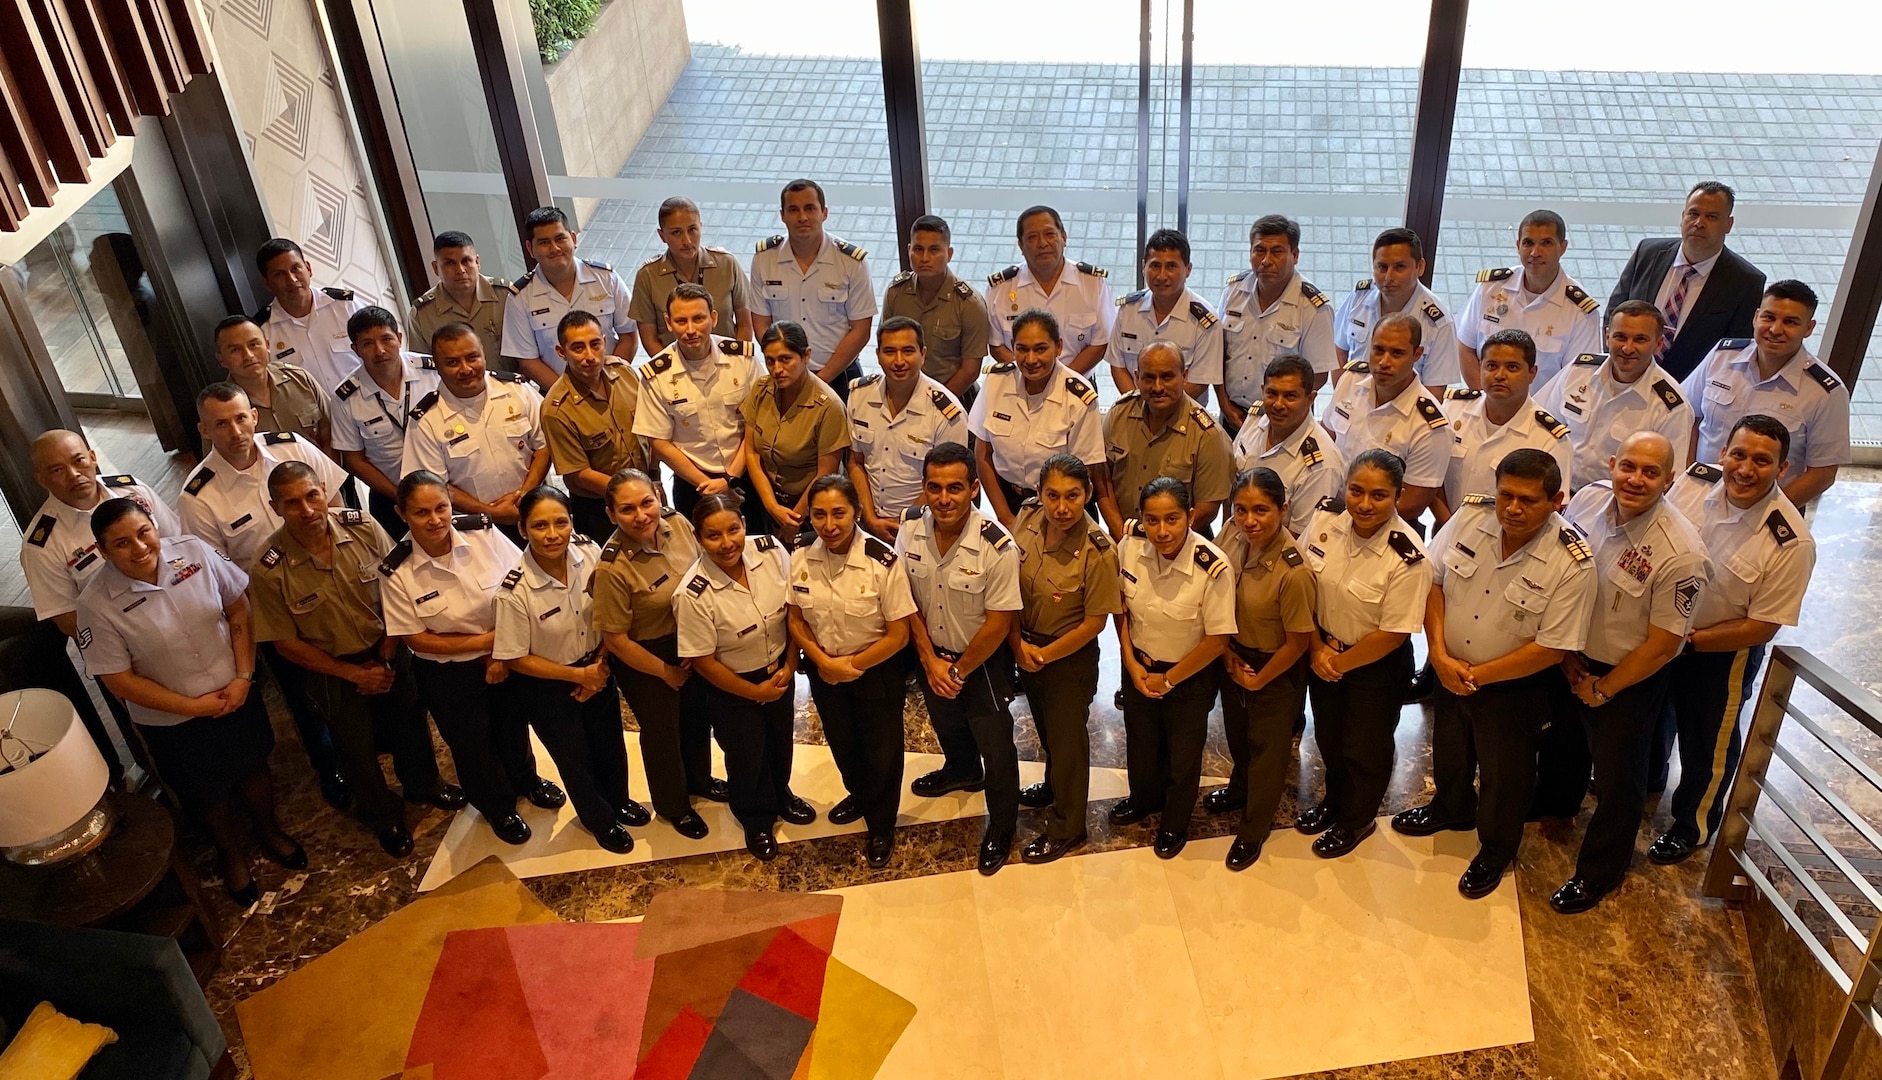 The Inter-American Air Force’s Academy hosted this second-ever Officer and Noncommissioned Officer Professional Development Seminar and Subject Matter Expert Exchange with members of the Peruvian Army, Air Force, and Navy, in Lima, Peru, March 9-12. 
The goal for this PME seminar was to create an opportunity to increase collaboration, share experiences and lessons learned and showcase the importance of leadership training for officers and enlisted military members at all levels to enhance interoperability and mission success.